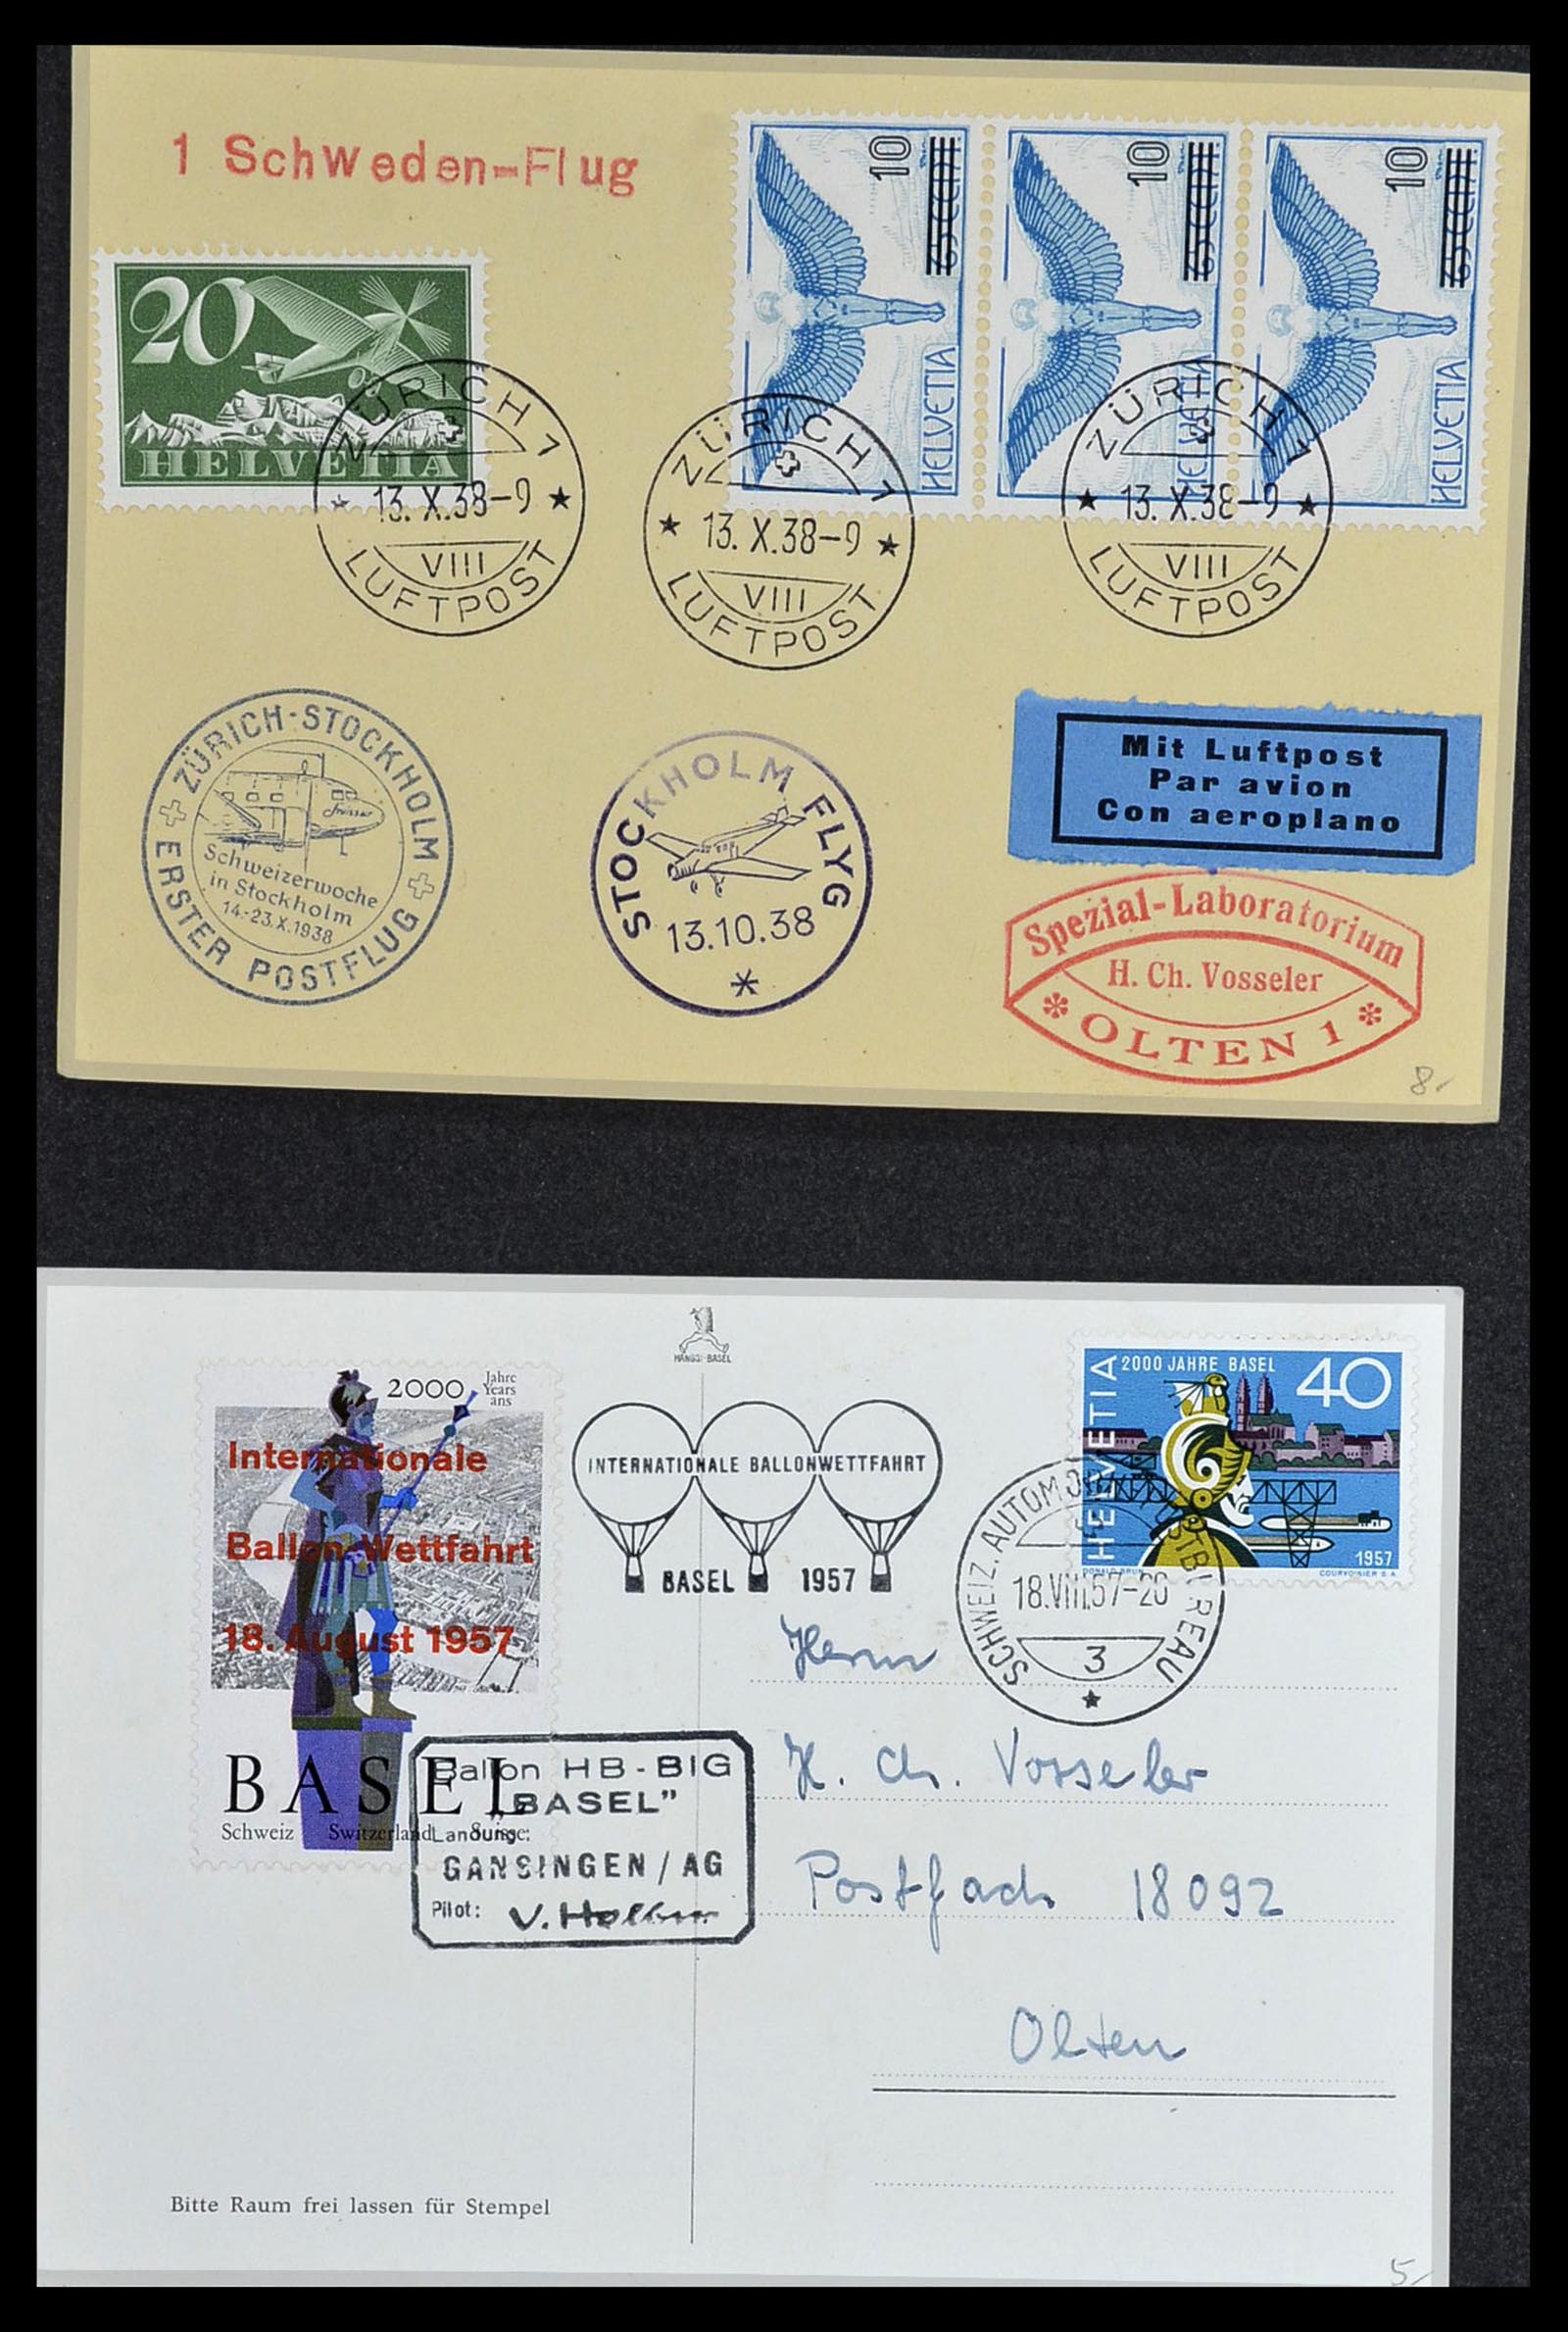 34141 101 - Stamp collection 34141 Switzerland airmail covers 1920-1960.